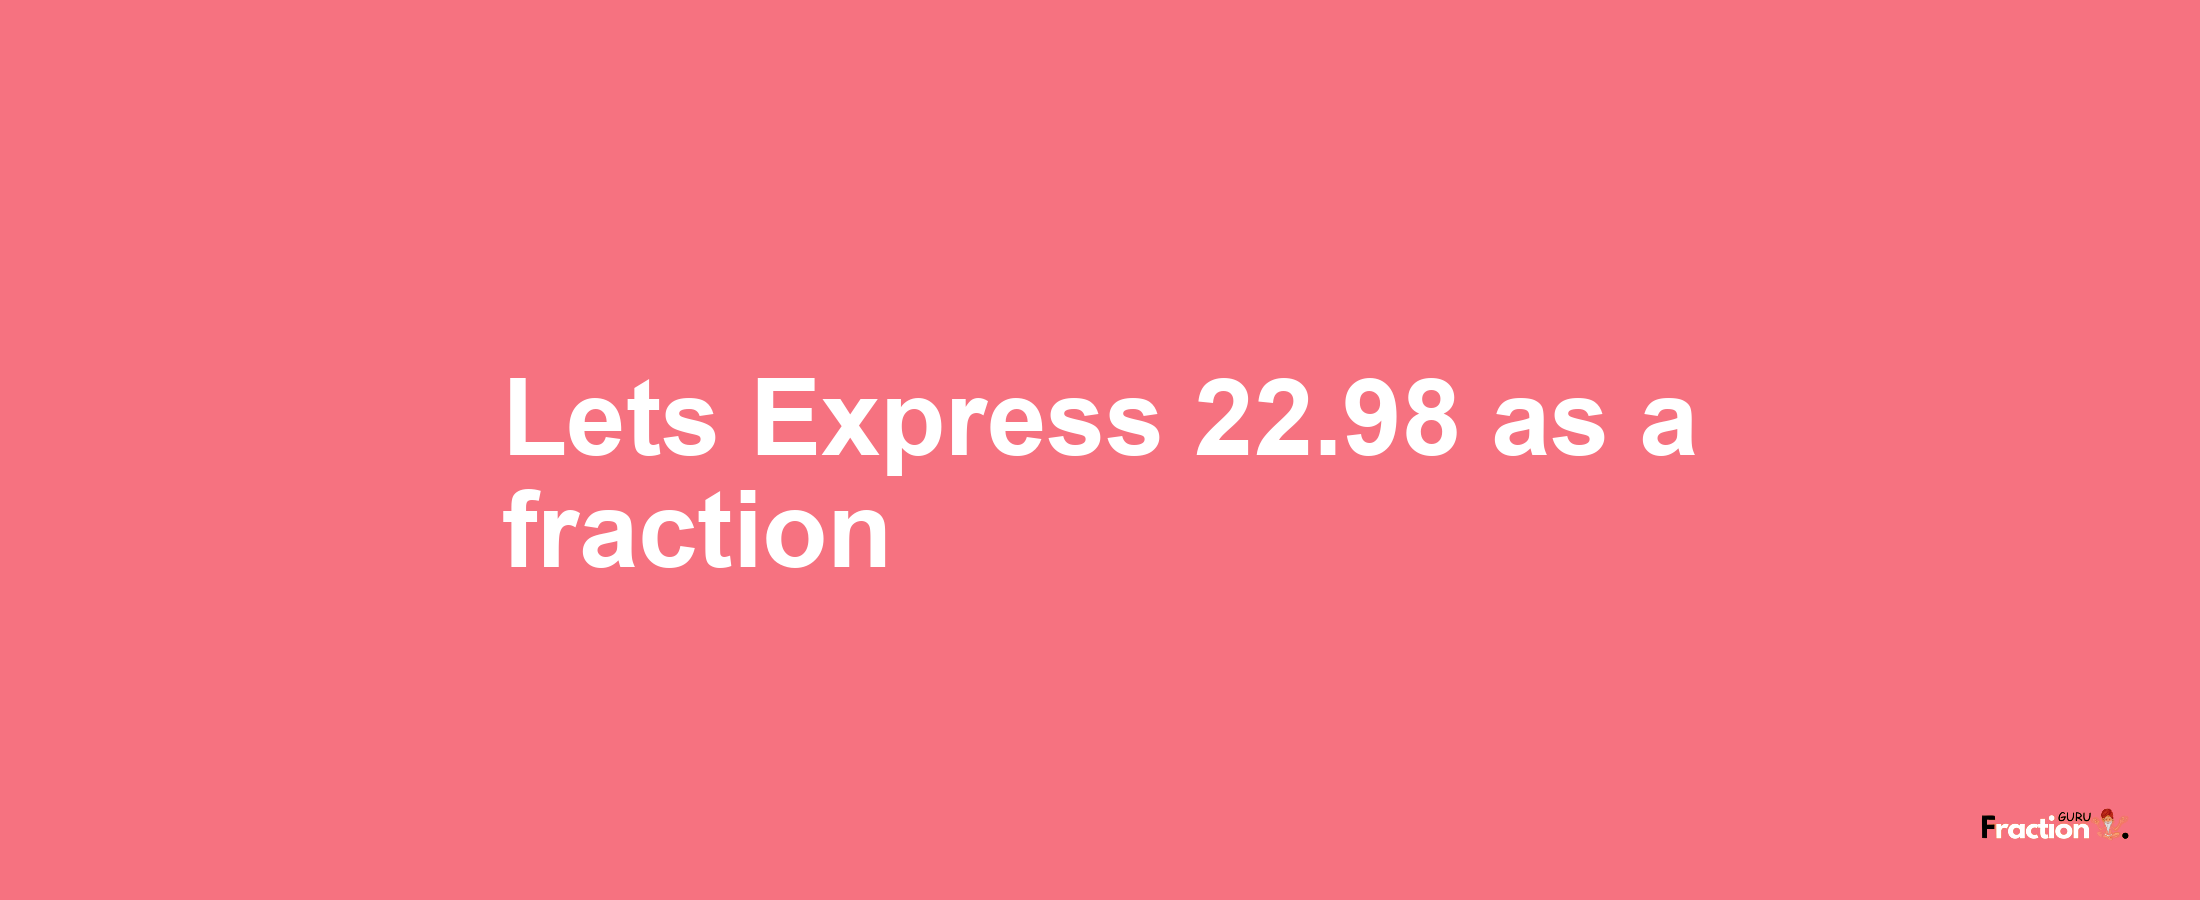 Lets Express 22.98 as afraction